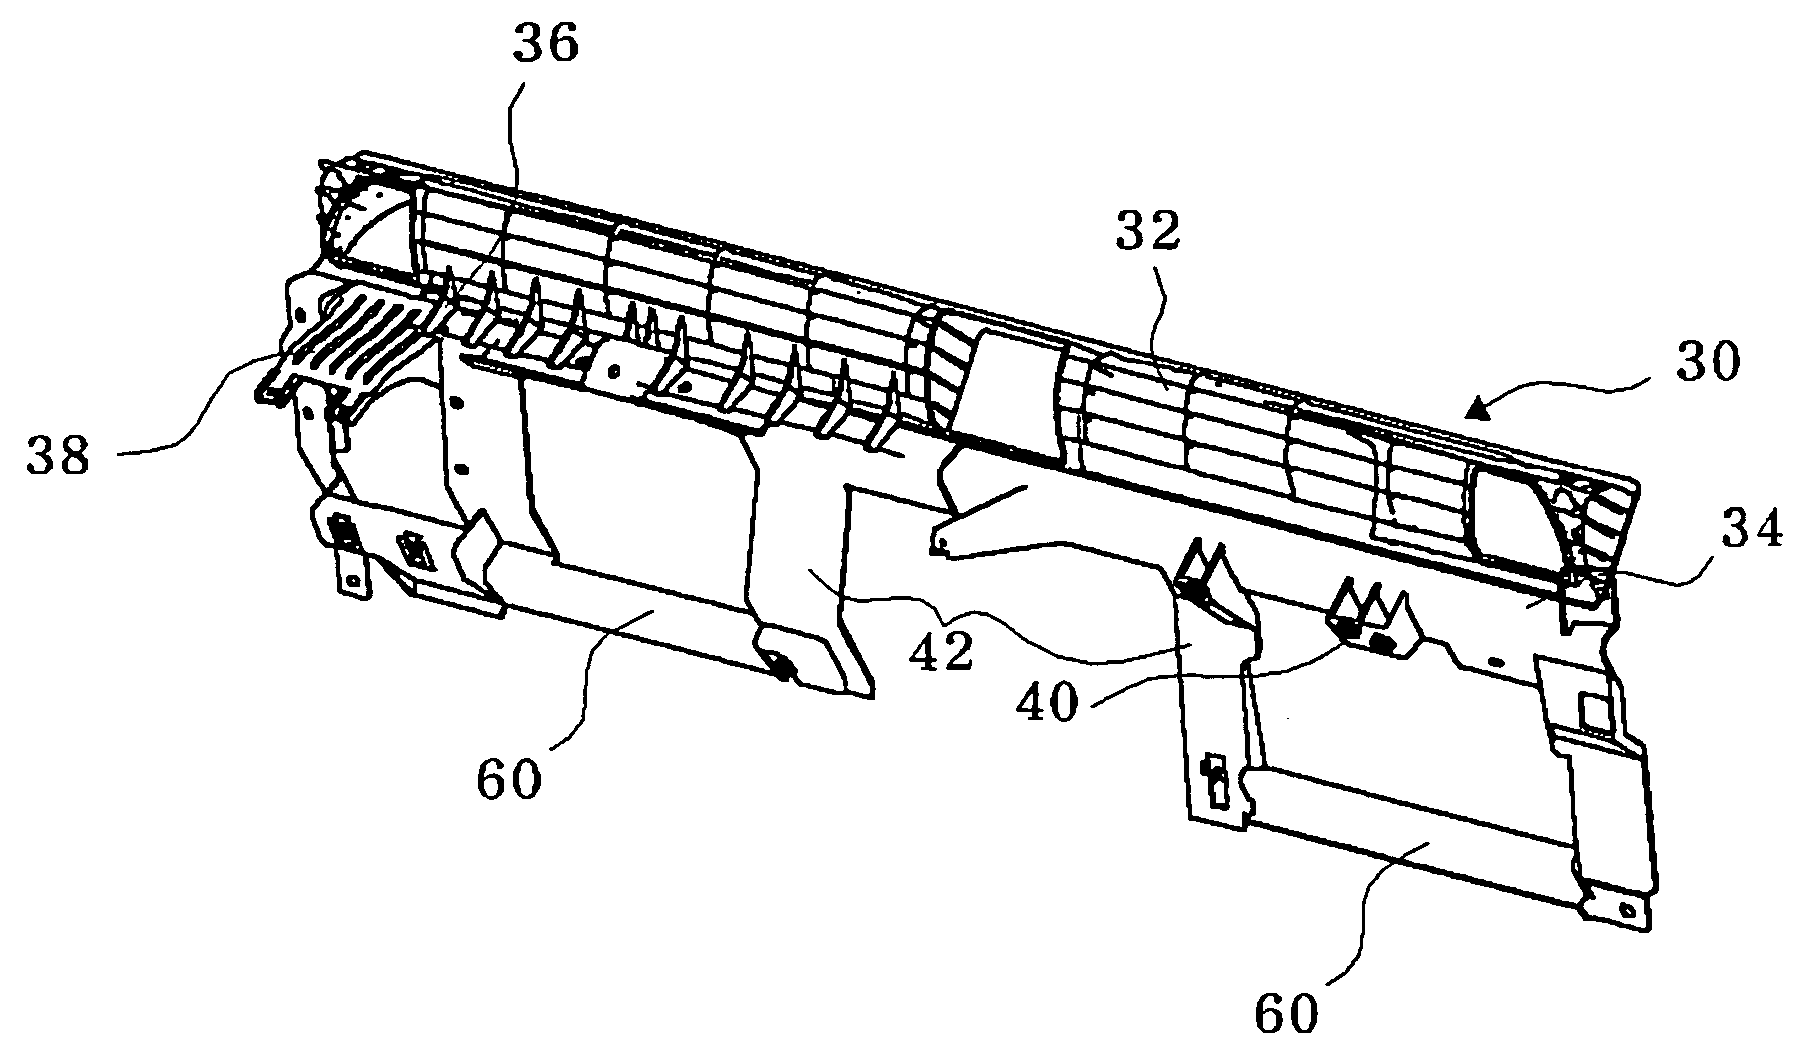 Vehicle air duct assembly of an integrated beam structure